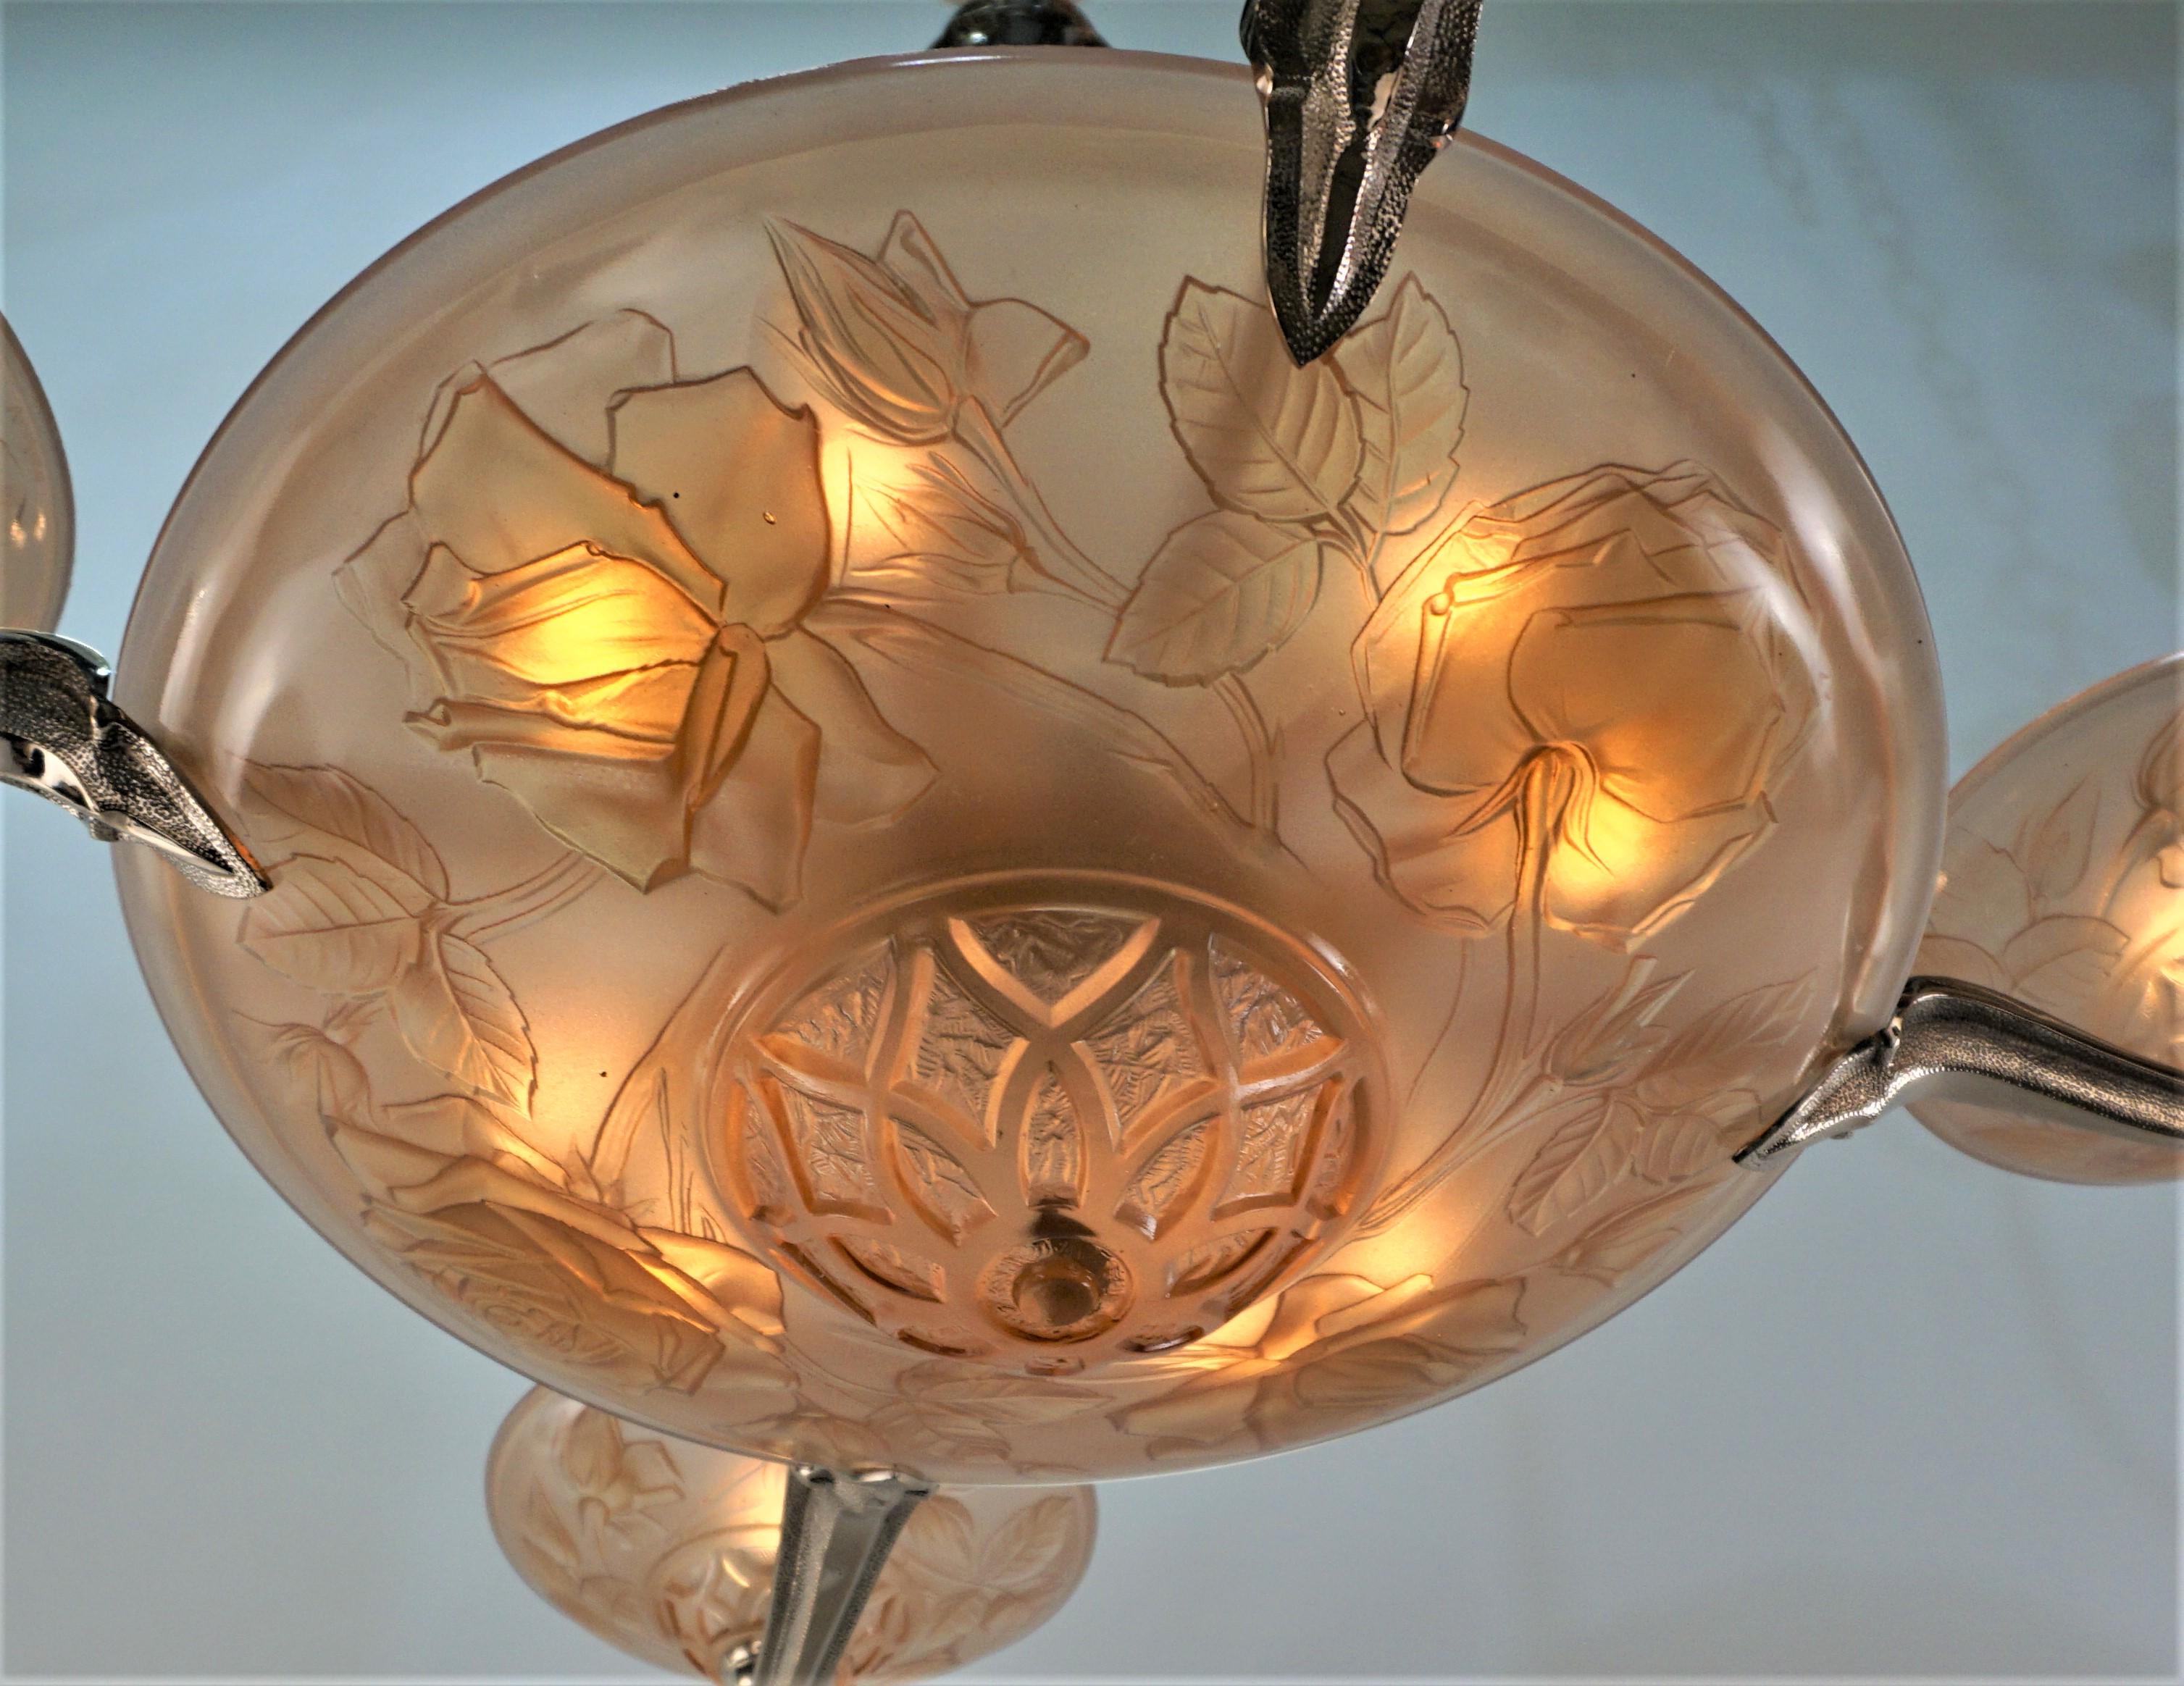 Beautiful molded-pressed rose peach color glass, large center bowel and four small for the sides.
Frame is nickel on bronze. 
This chandelier has new wiring with total of twelve lights max 60 watt each.
Width is 34